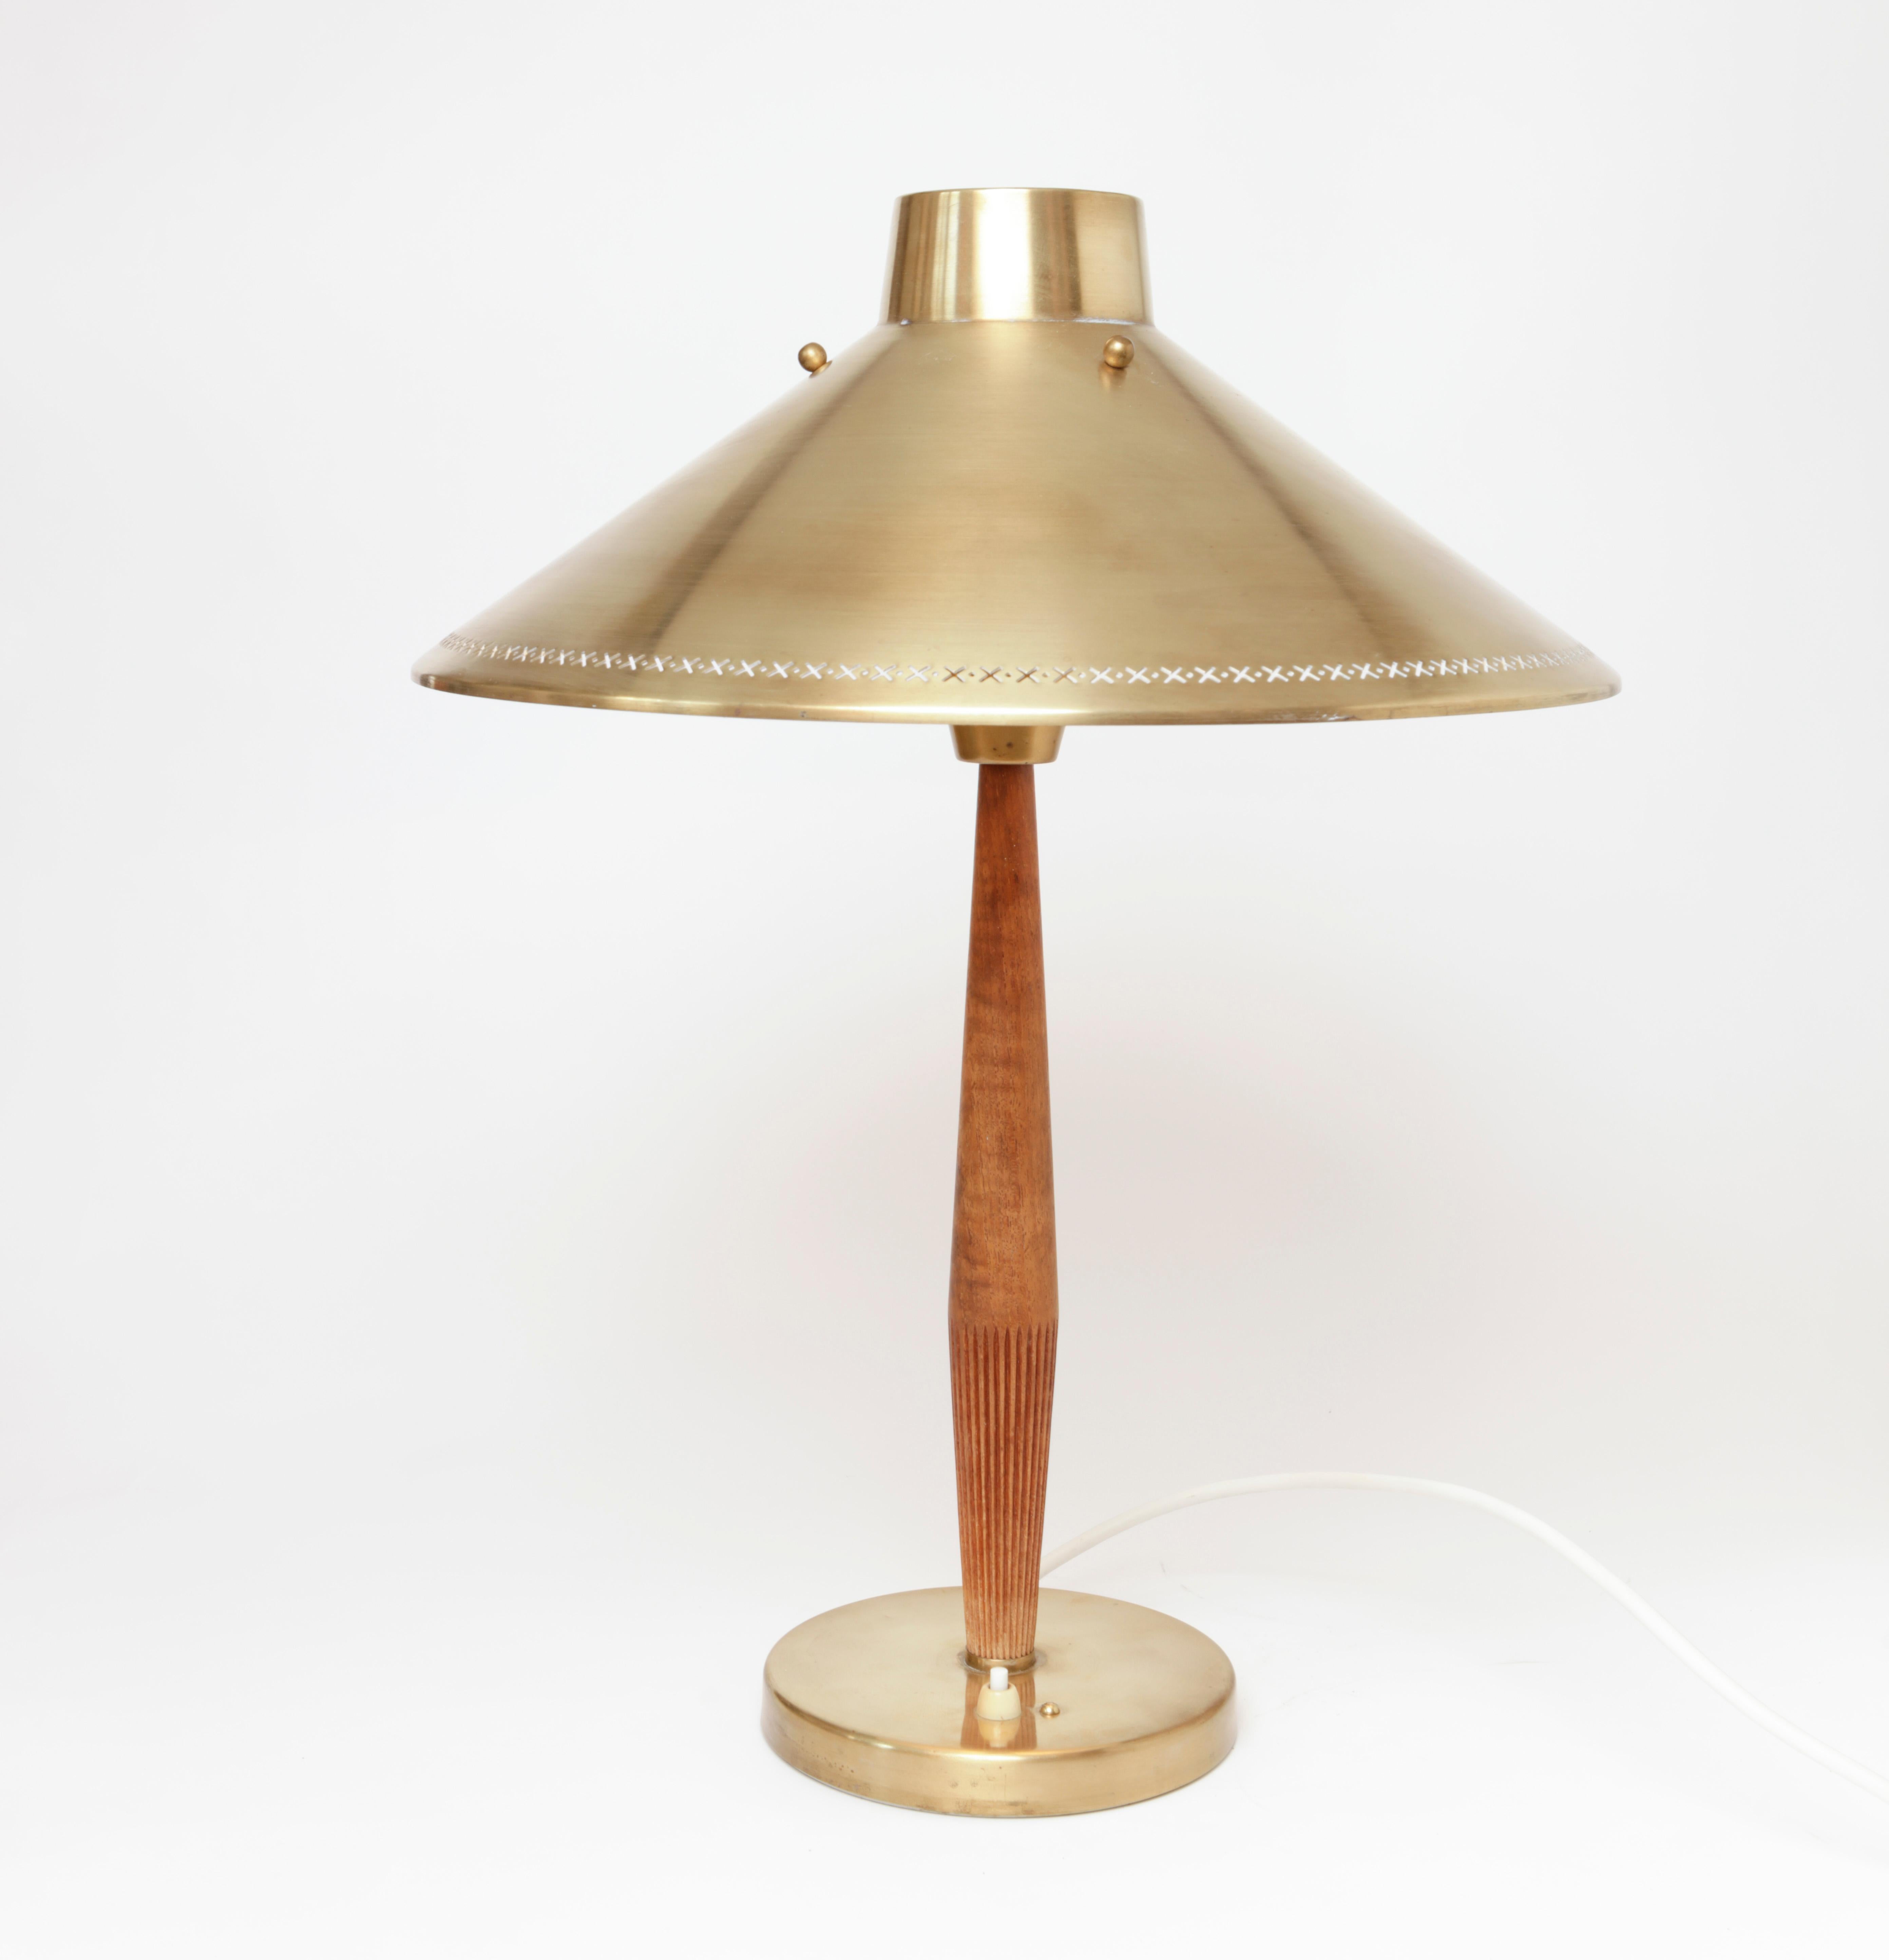 Table lamp in brass and teak designed by Hans Bergström for ASEA, 1940s.
Measures: Height 53cm/20.9 and diameter 40cm/15.7. Marked: ASEA.